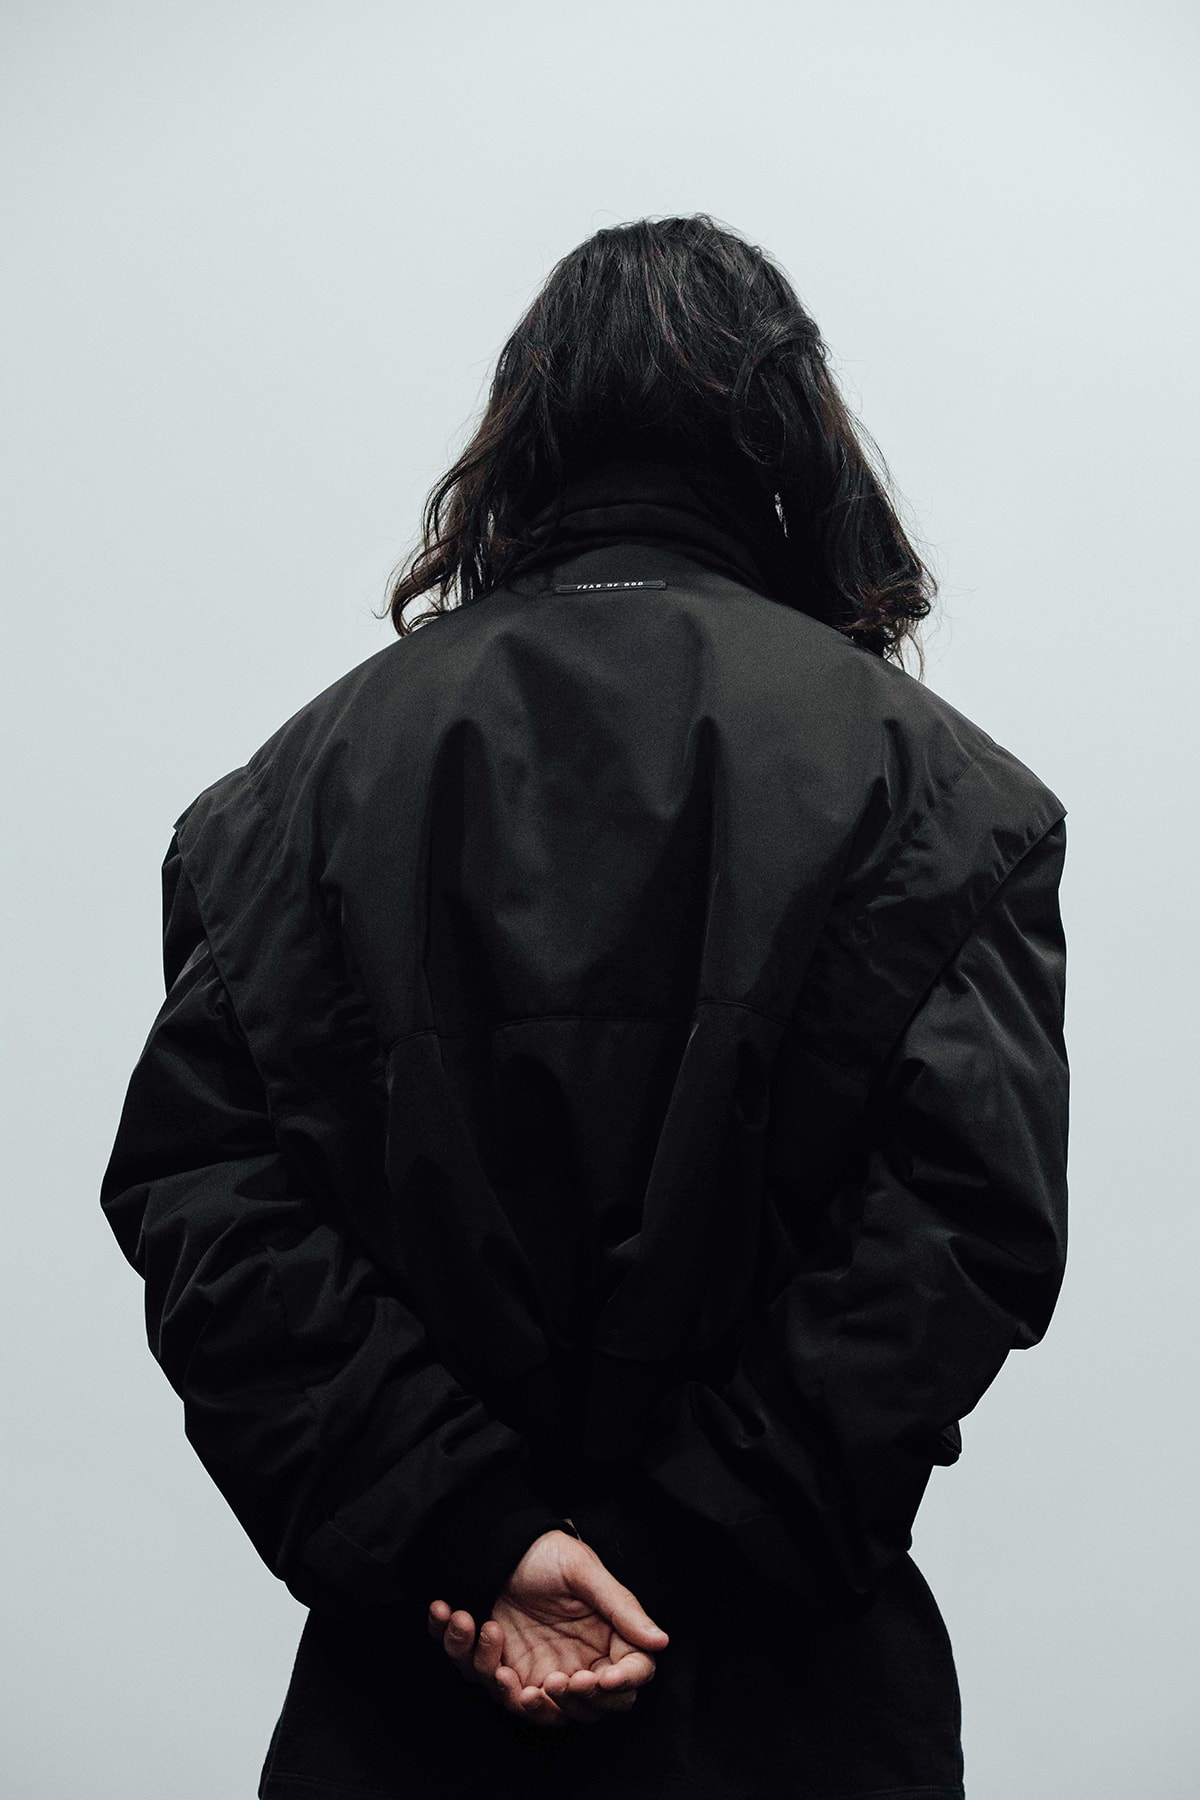 Fear of God sixth collection behind the scenes backstage making of exclusive photos pictures lookbook Jerry Lorenzo footwear jared leto drop release date